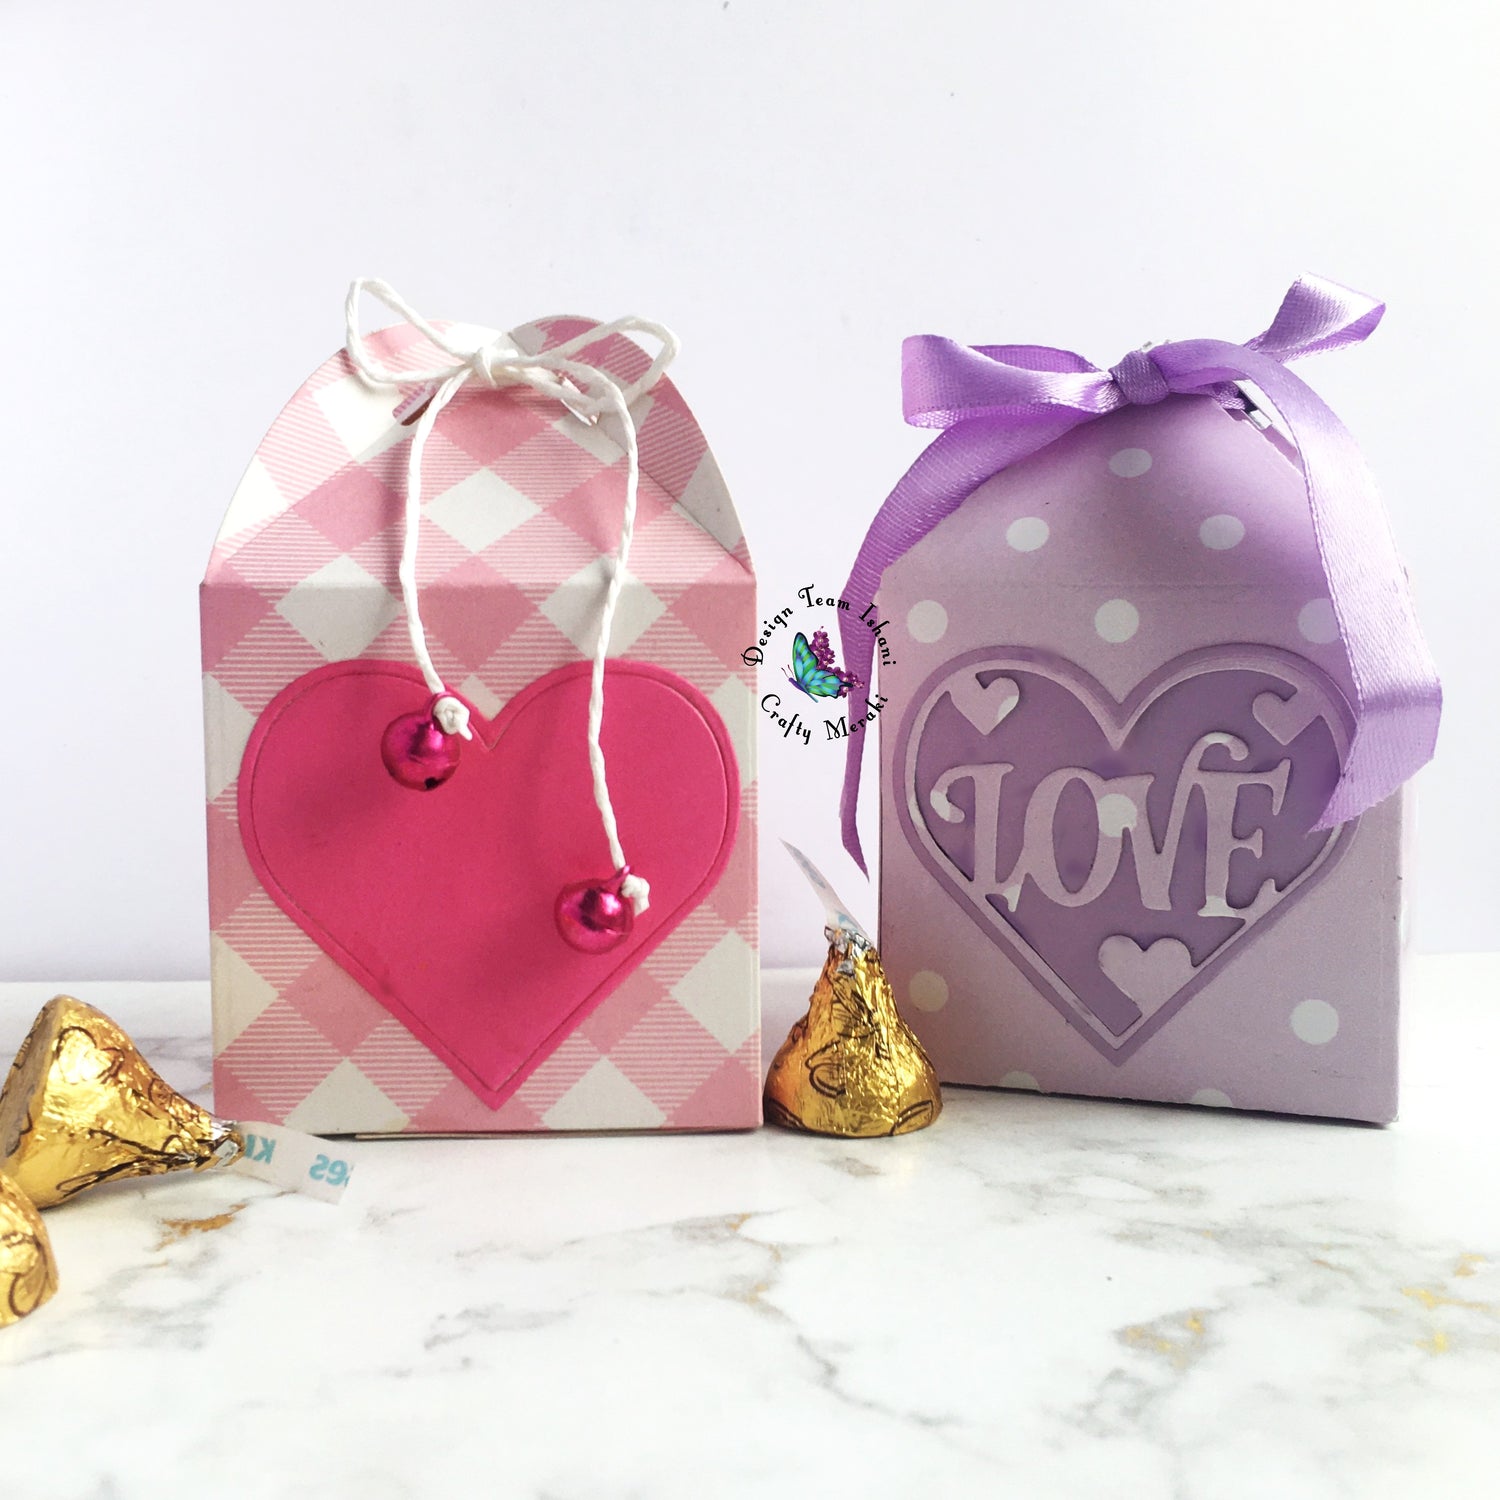 Capture my heart 3 D Treat boxes by Ishani